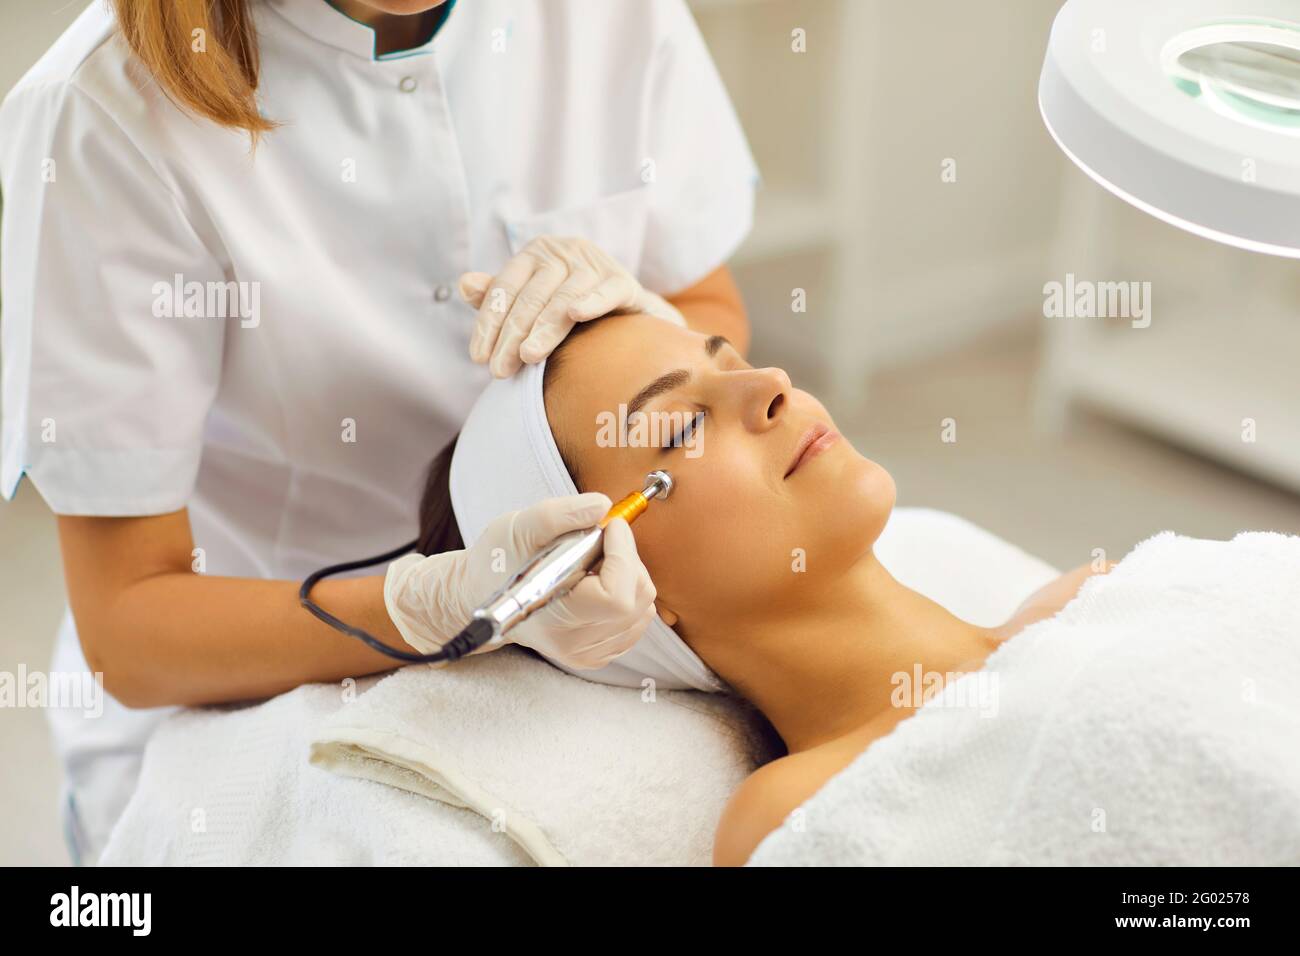 Beautician using electric mesotherapy device to decrease wrinkles on customer's face Stock Photo